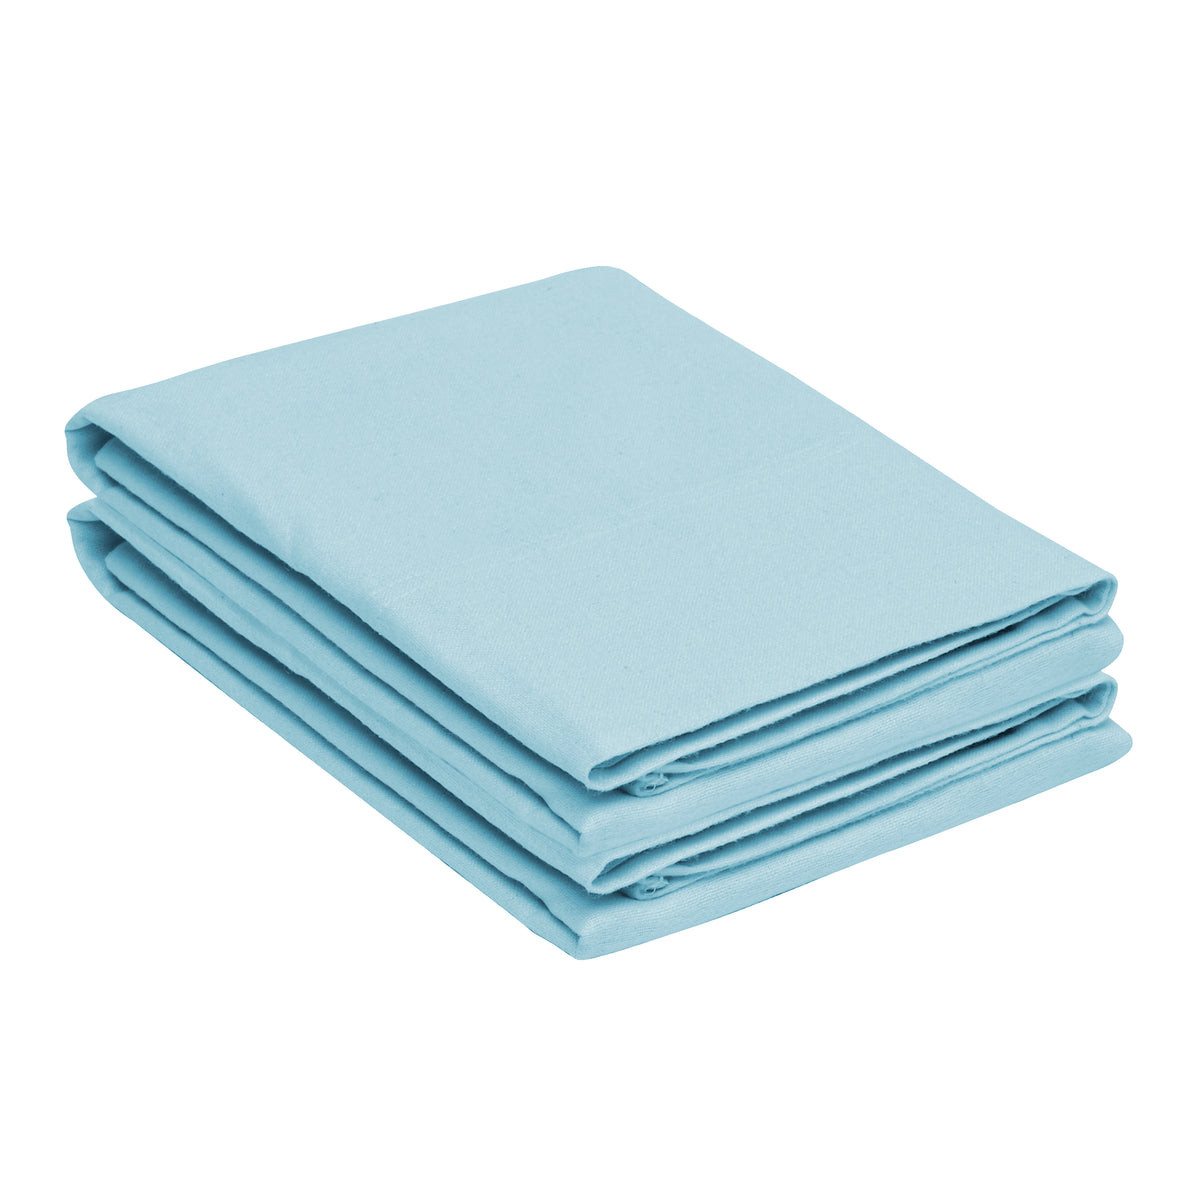 Solid Flannel Cotton Soft Fuzzy Pillowcases, Set of 2 - LightBlue